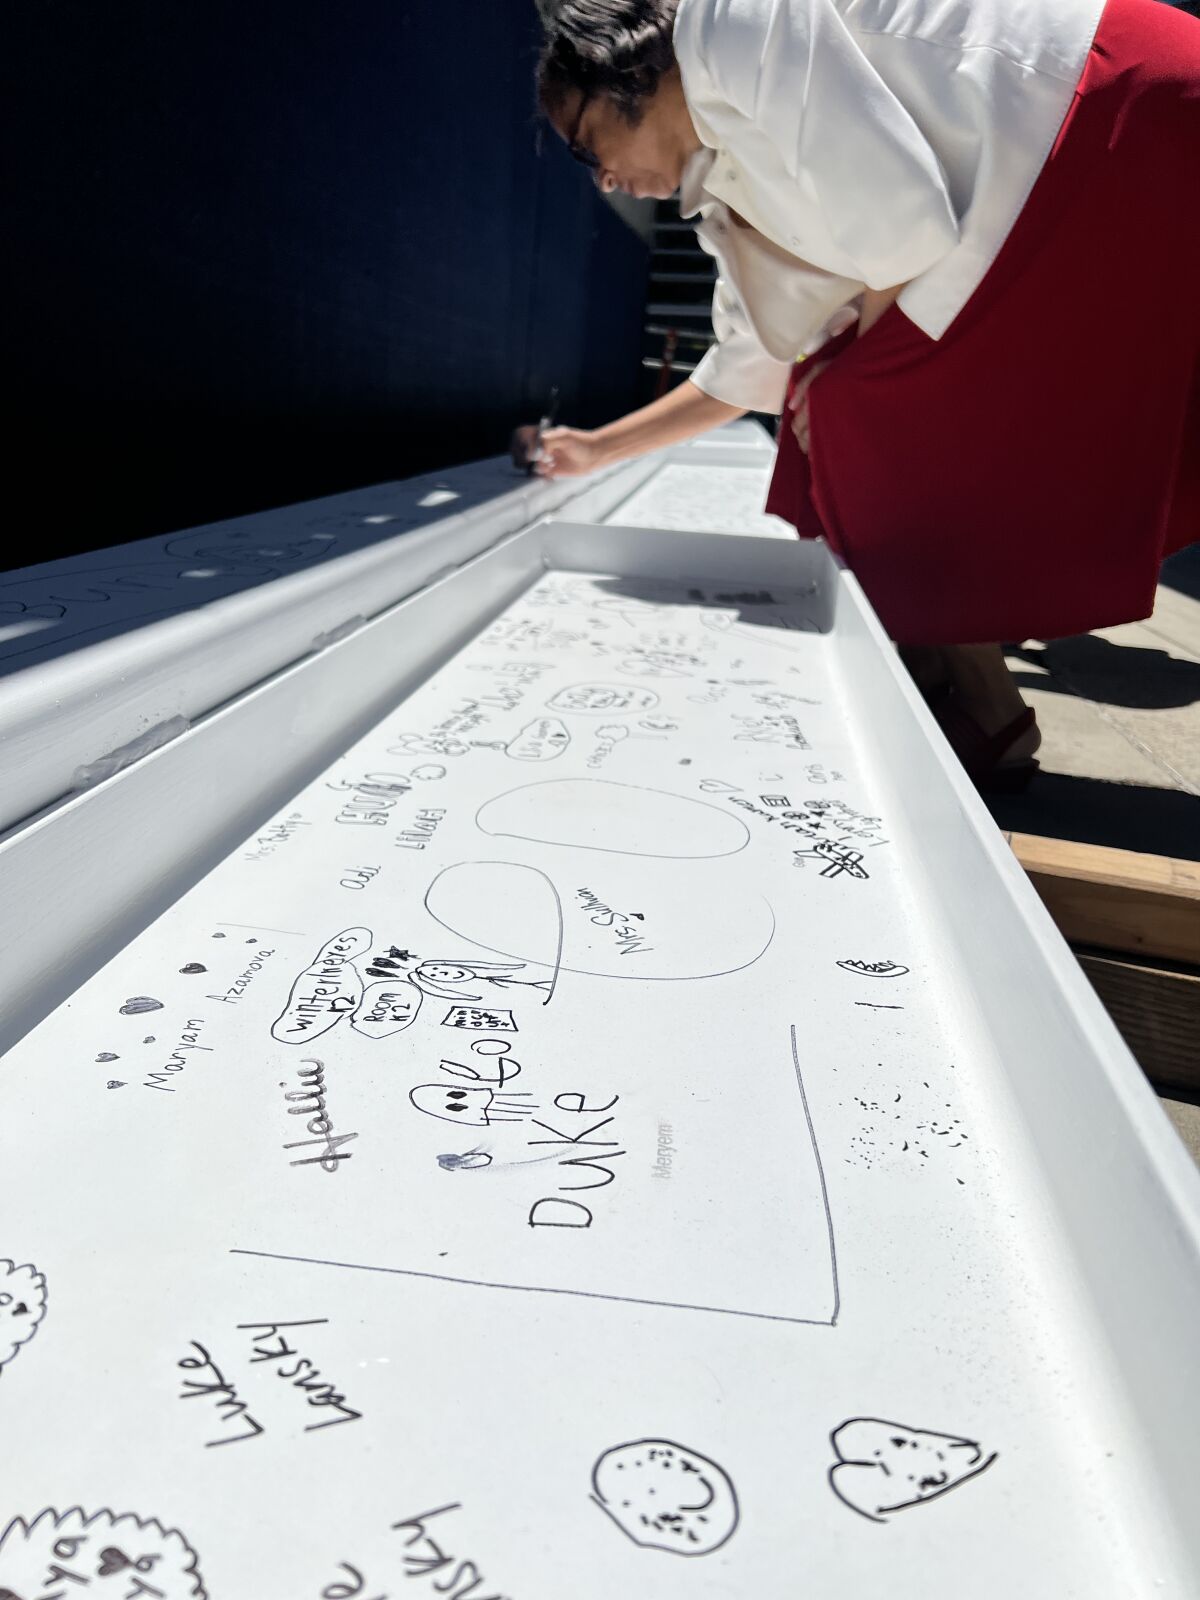 SDUSD board President Sharon Whitehurst-Payne signs a beam that now sits atop a new structure at La Jolla Elementary School.